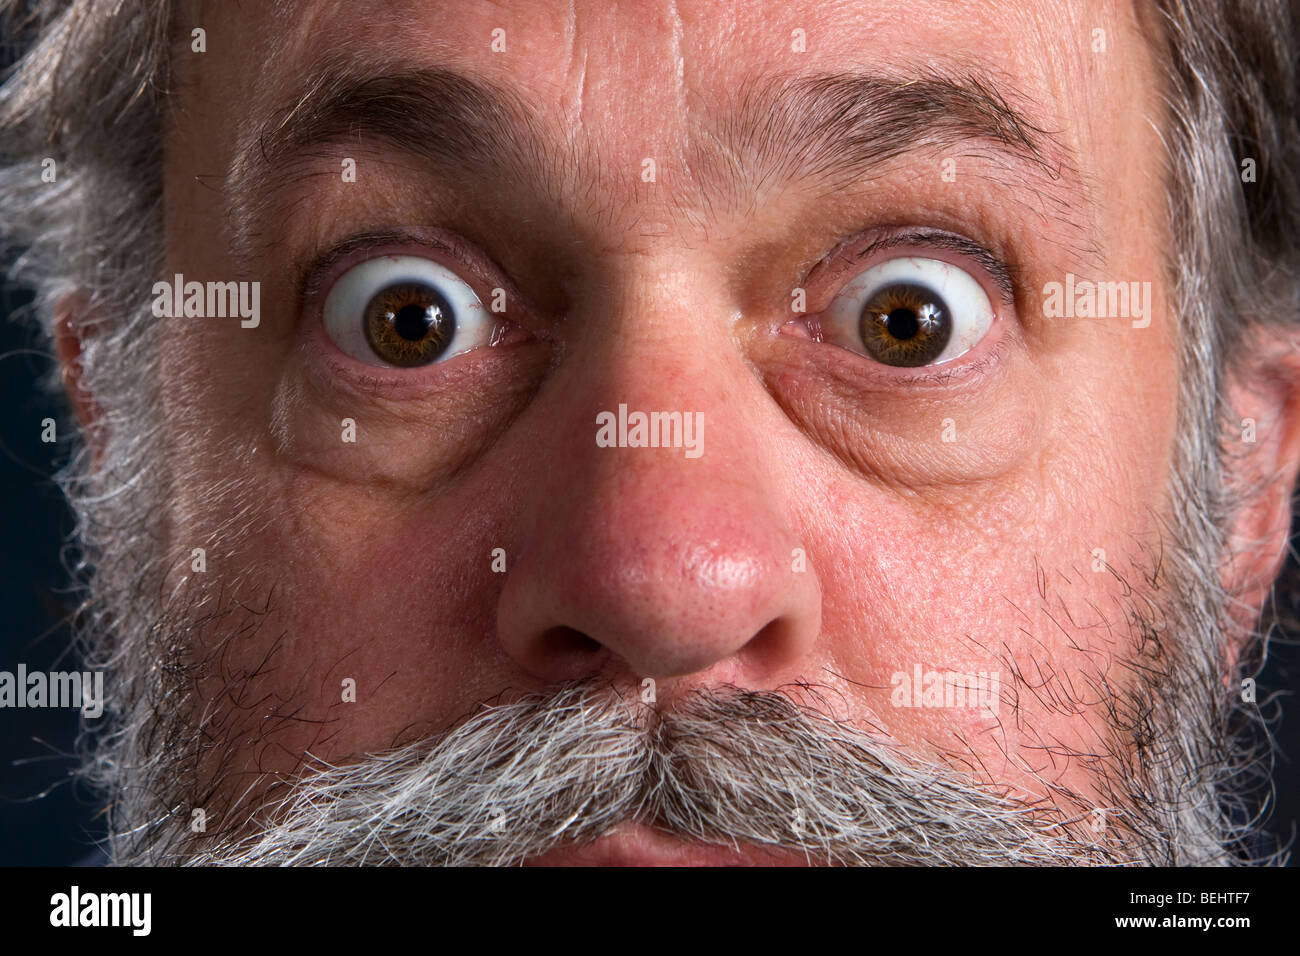 Wild eyed man with his eyes popped open. Stock Photo